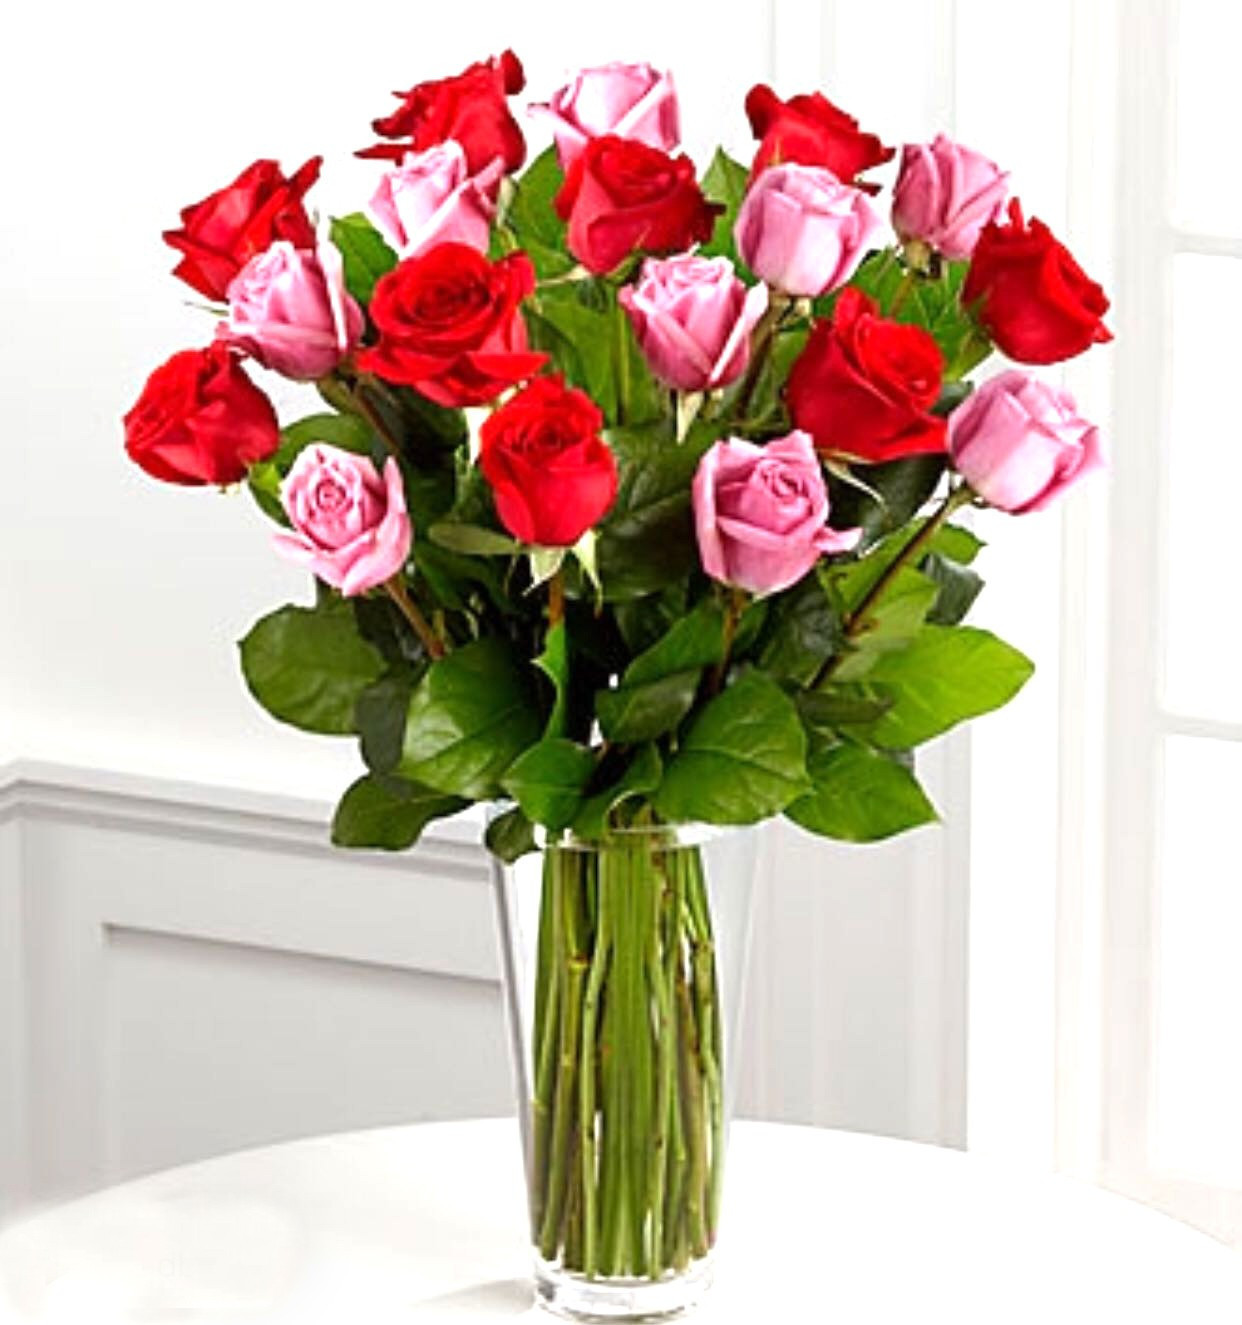 24 Cute Pink Bud Vase 2024 free download pink bud vase of 19 lovely flower pink beautiful white image gallery elak wallpaper intended for flower pink beautiful white image gallery beautiful 34 beautiful red and pink roses of 19 lov